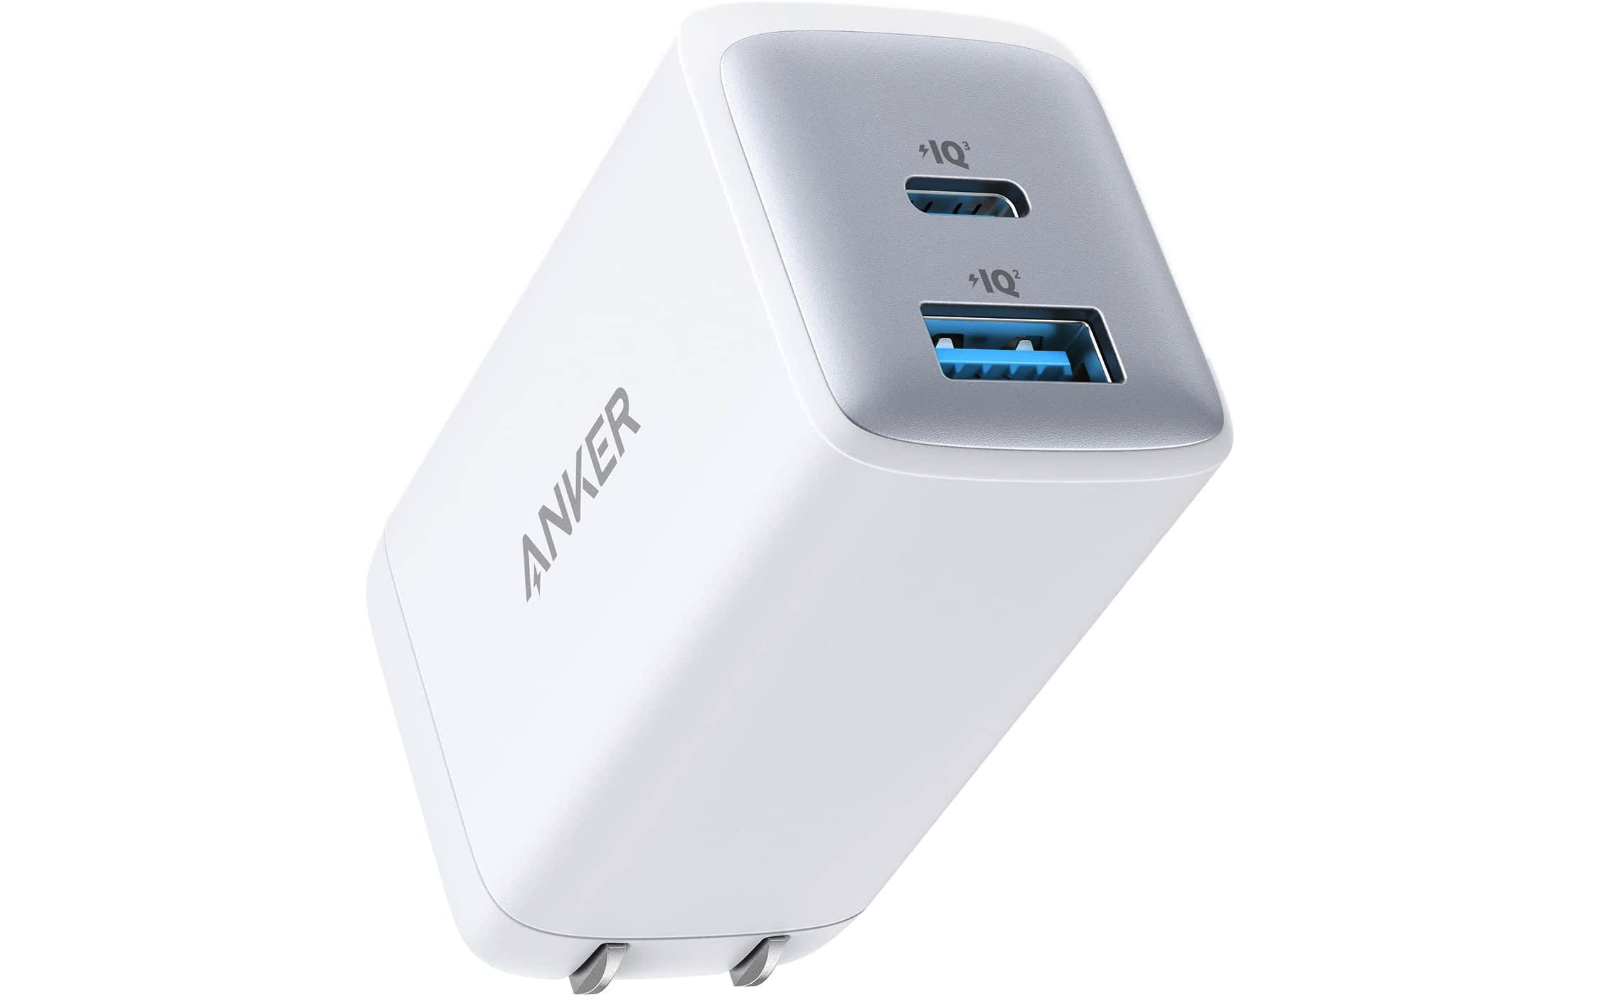 Anker-725-charger-65w.jpg